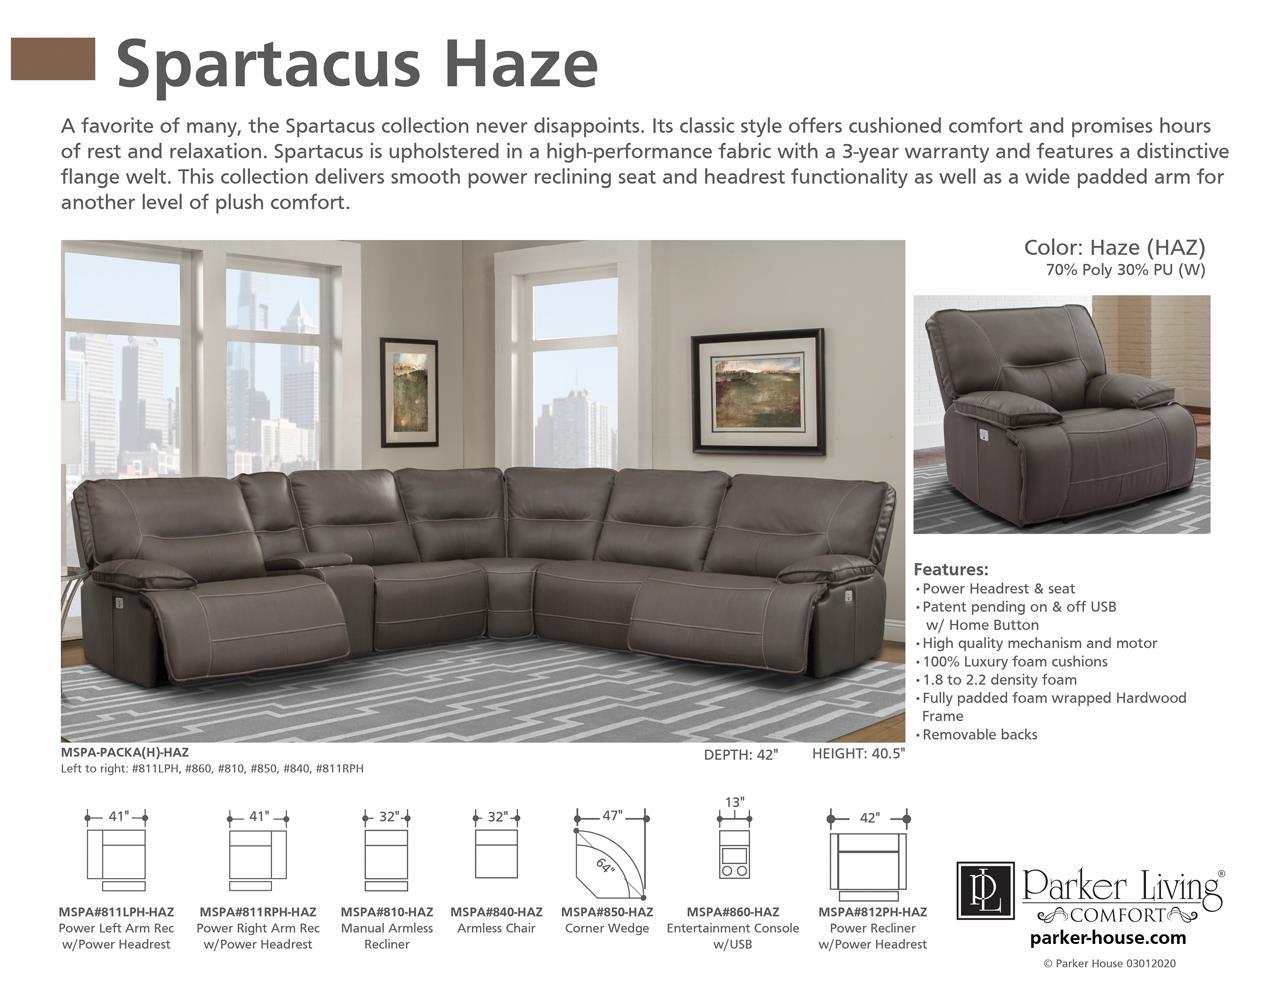 Spartacus Haze 6 Piece Modular Power Reclining Sectional With Power Headrests And Entertainment Console With Usb Popup,Parker House